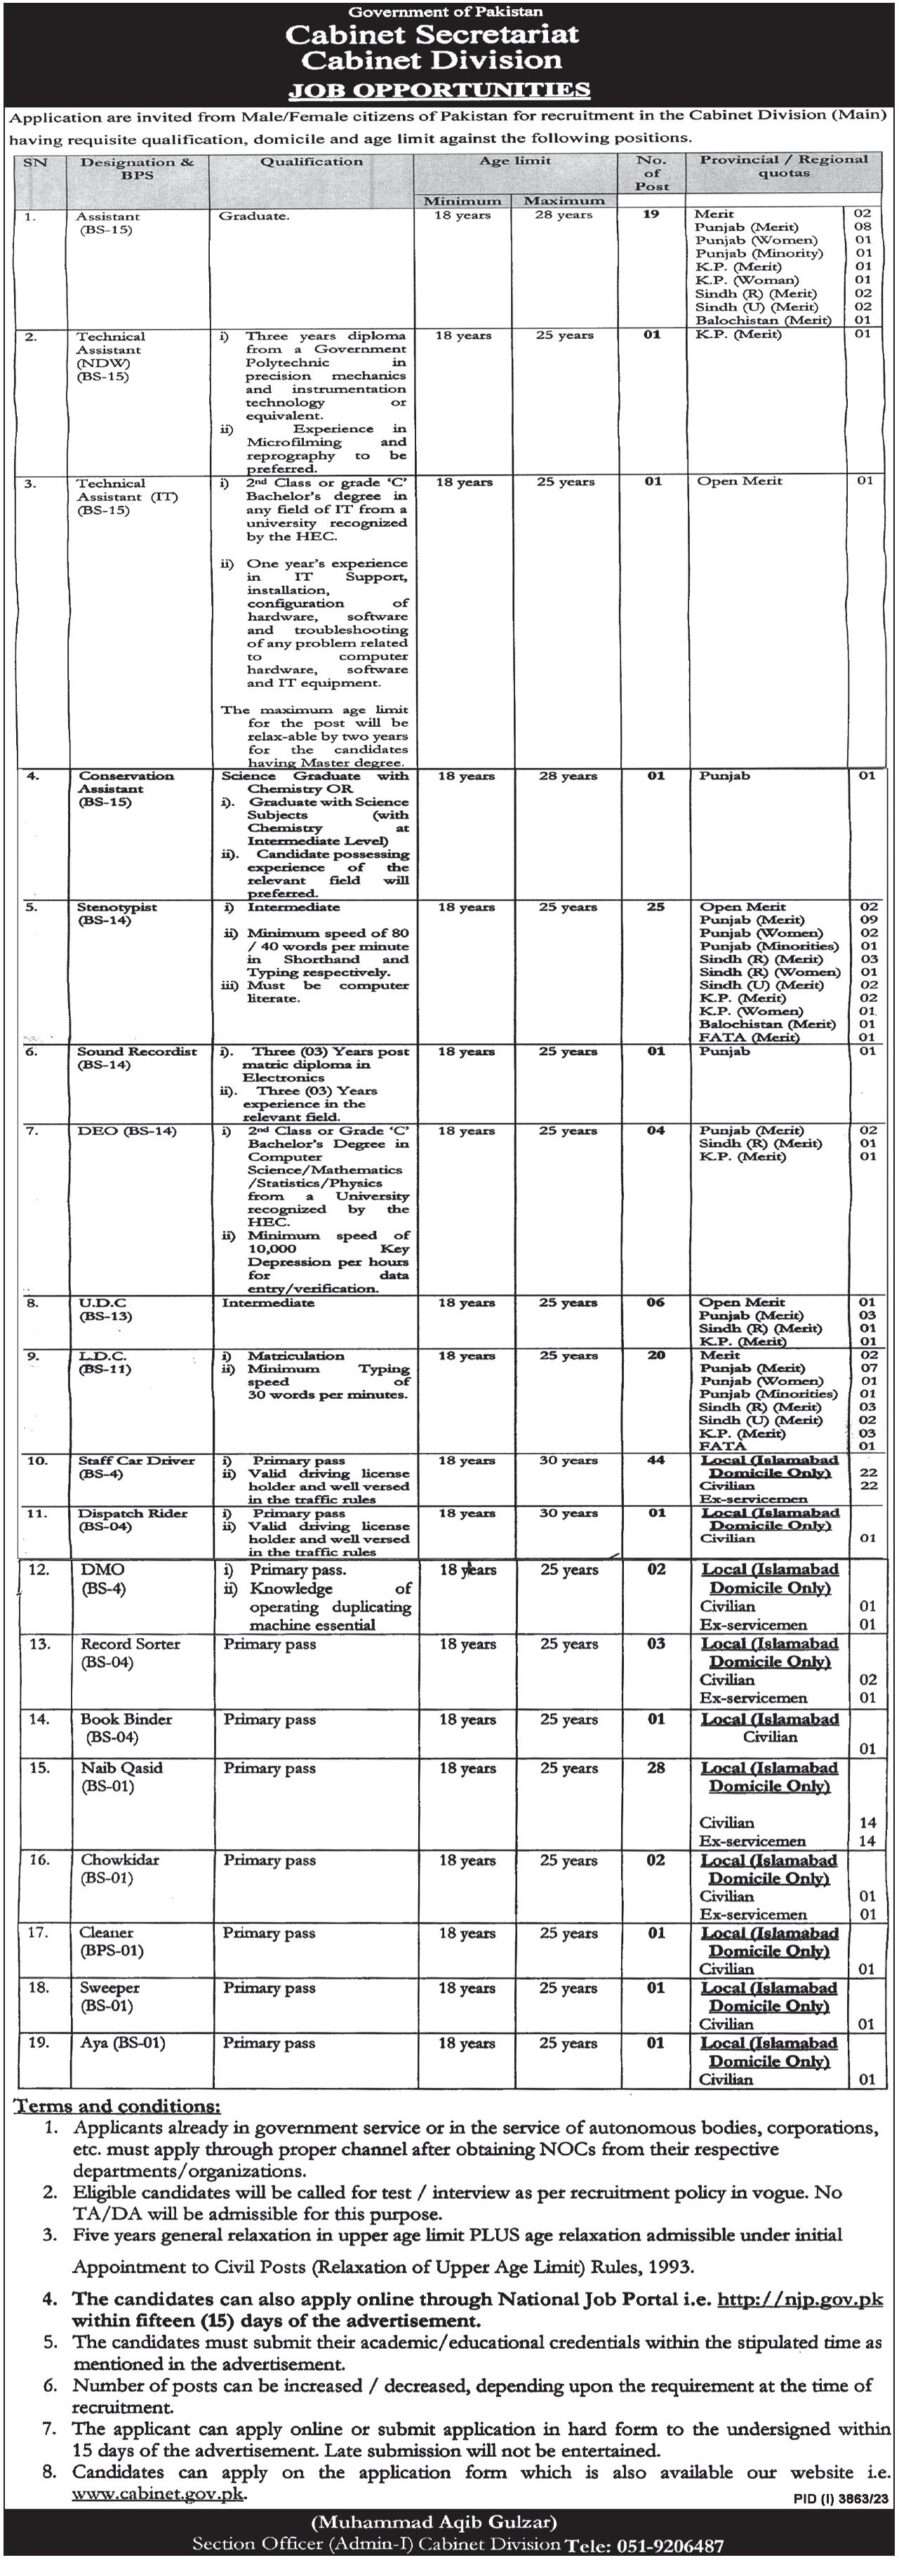 Job Opportunities at Cabinet Division